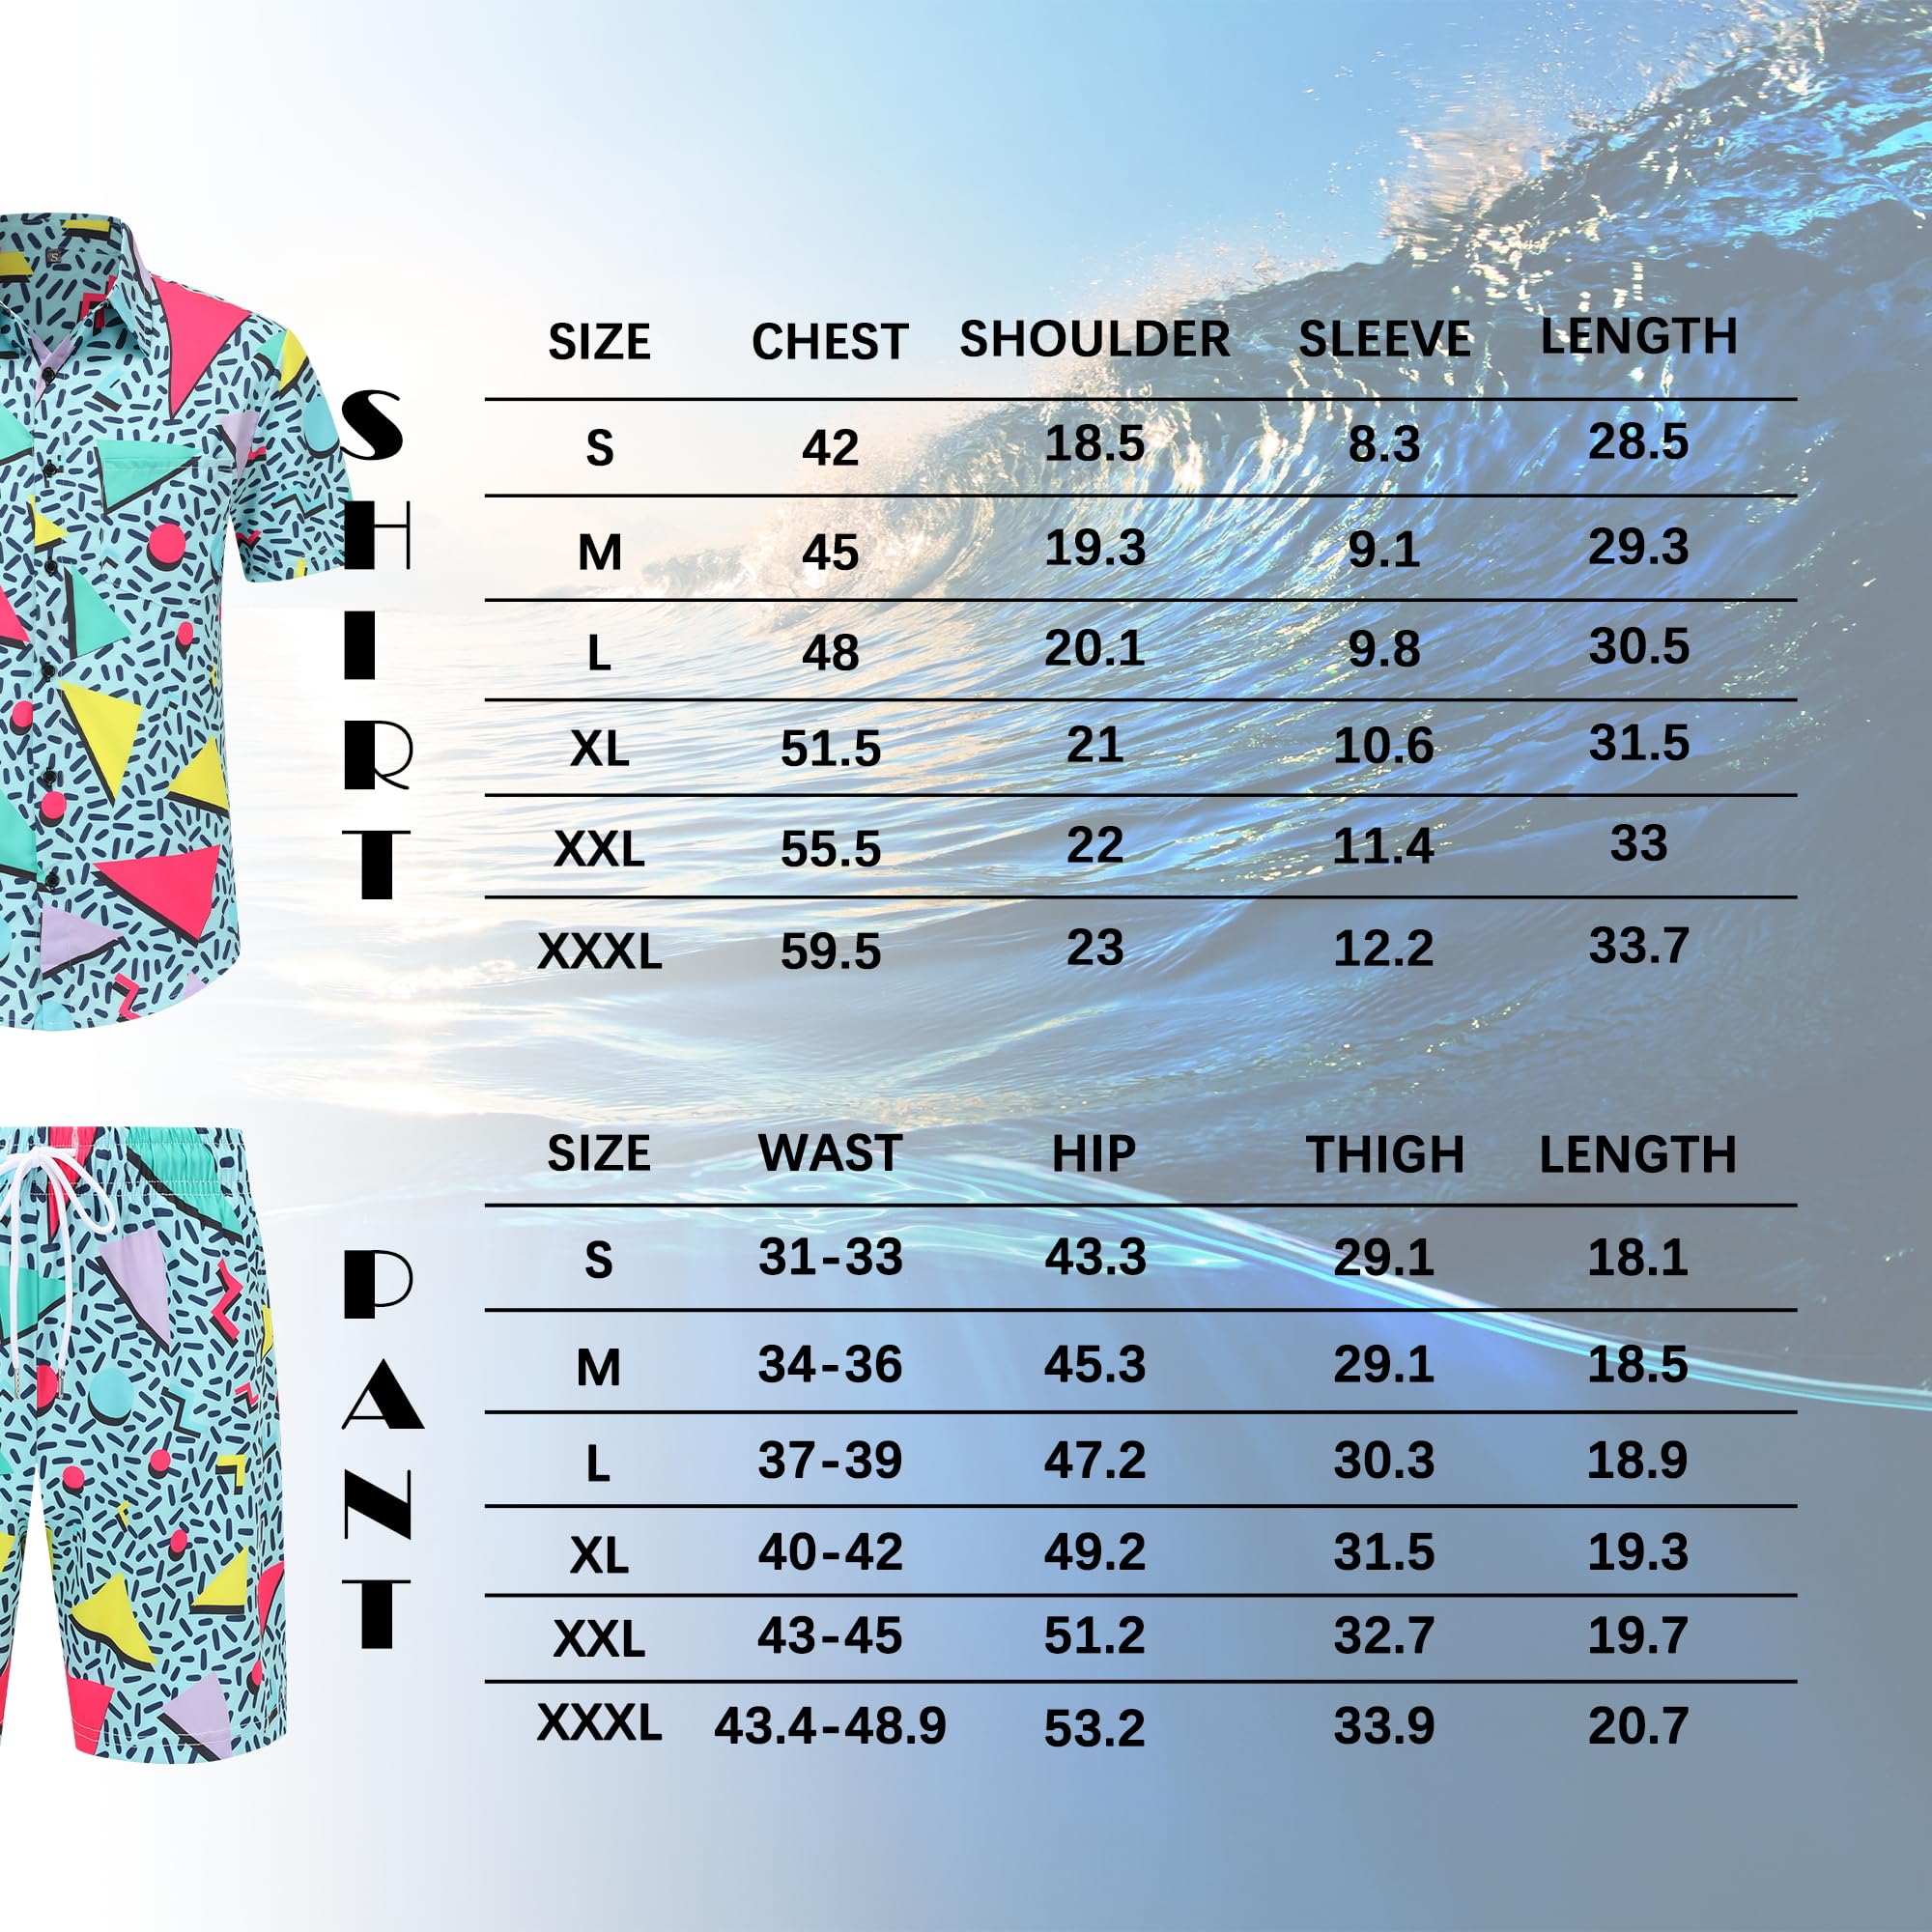 Spanoous Mens Hawaiian Shirts and Shorts Set 2 Pieces Beach Outfits Sets with Bucket Hats